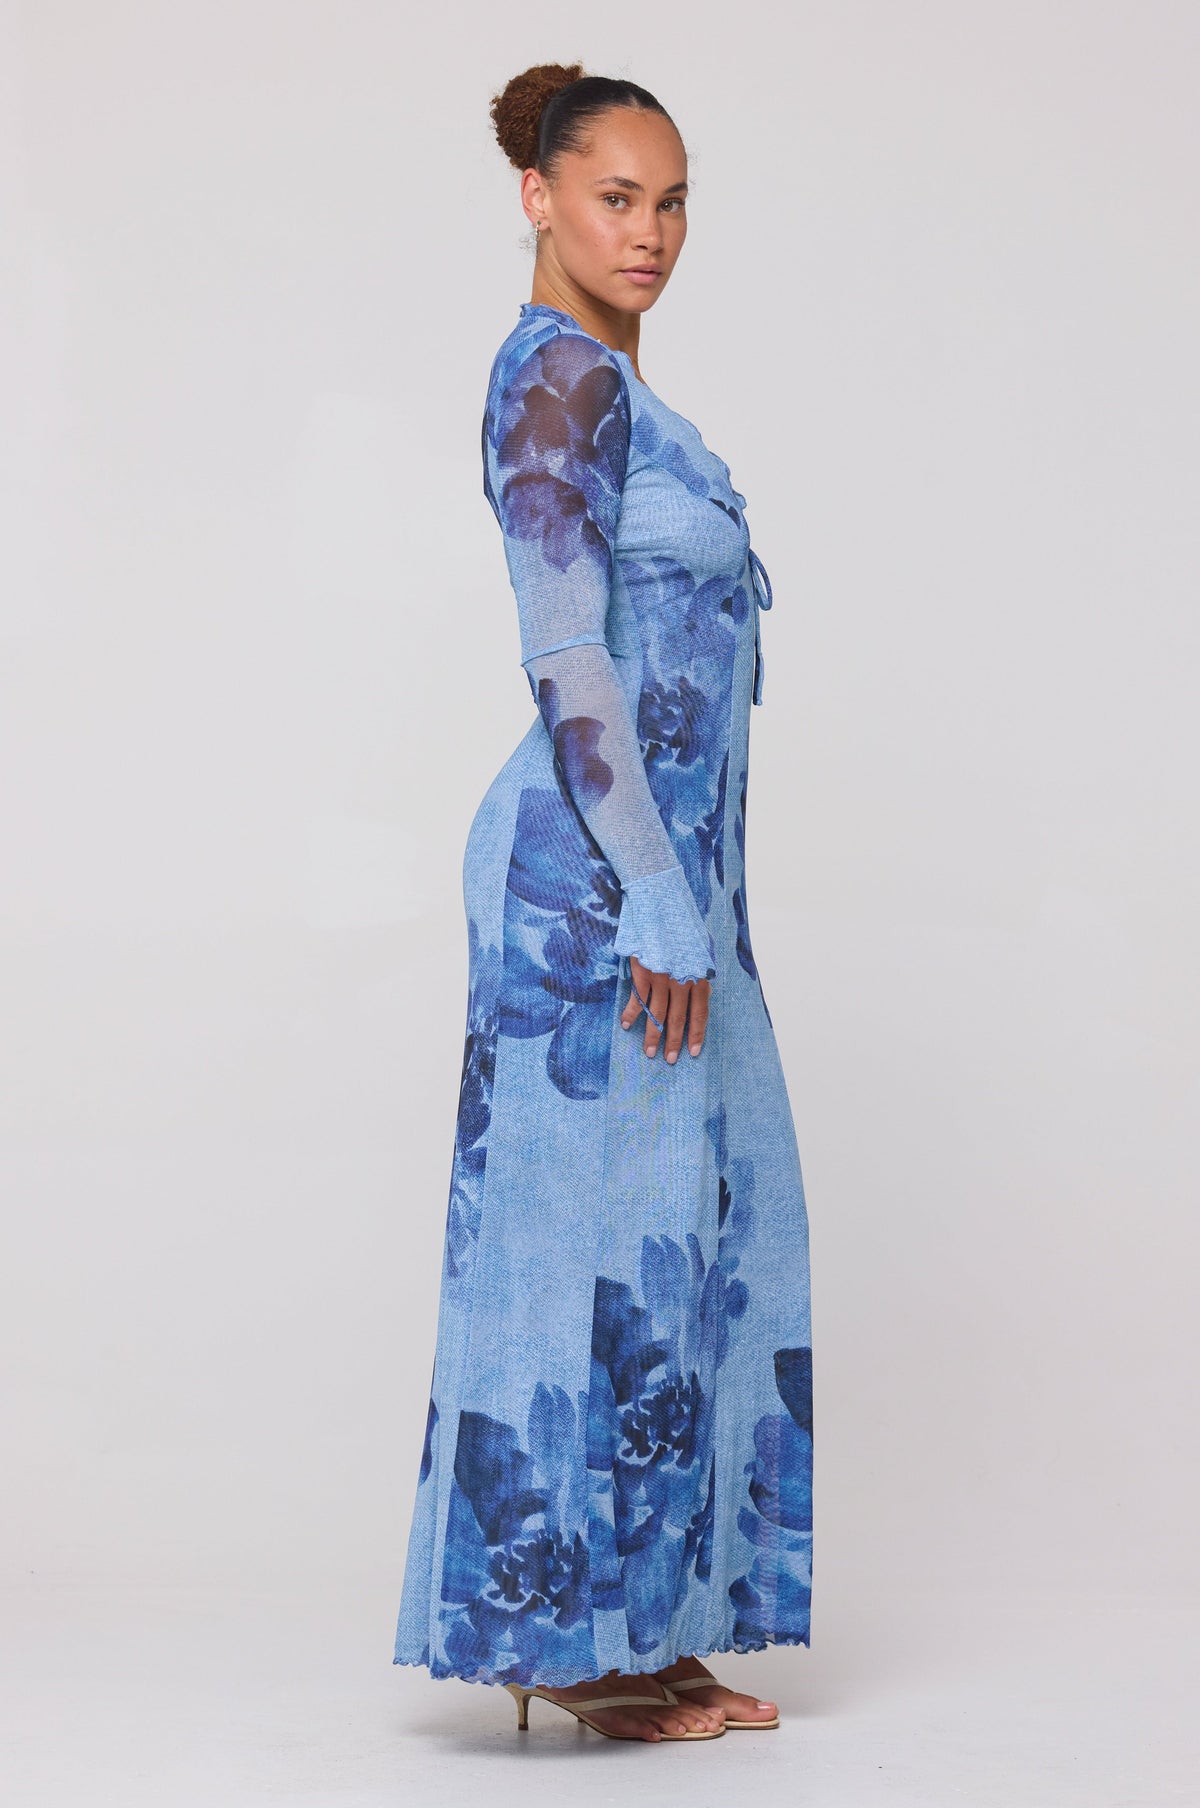 This is an image of Lennon Maxi in Indigo - RESA featuring a model wearing the dress